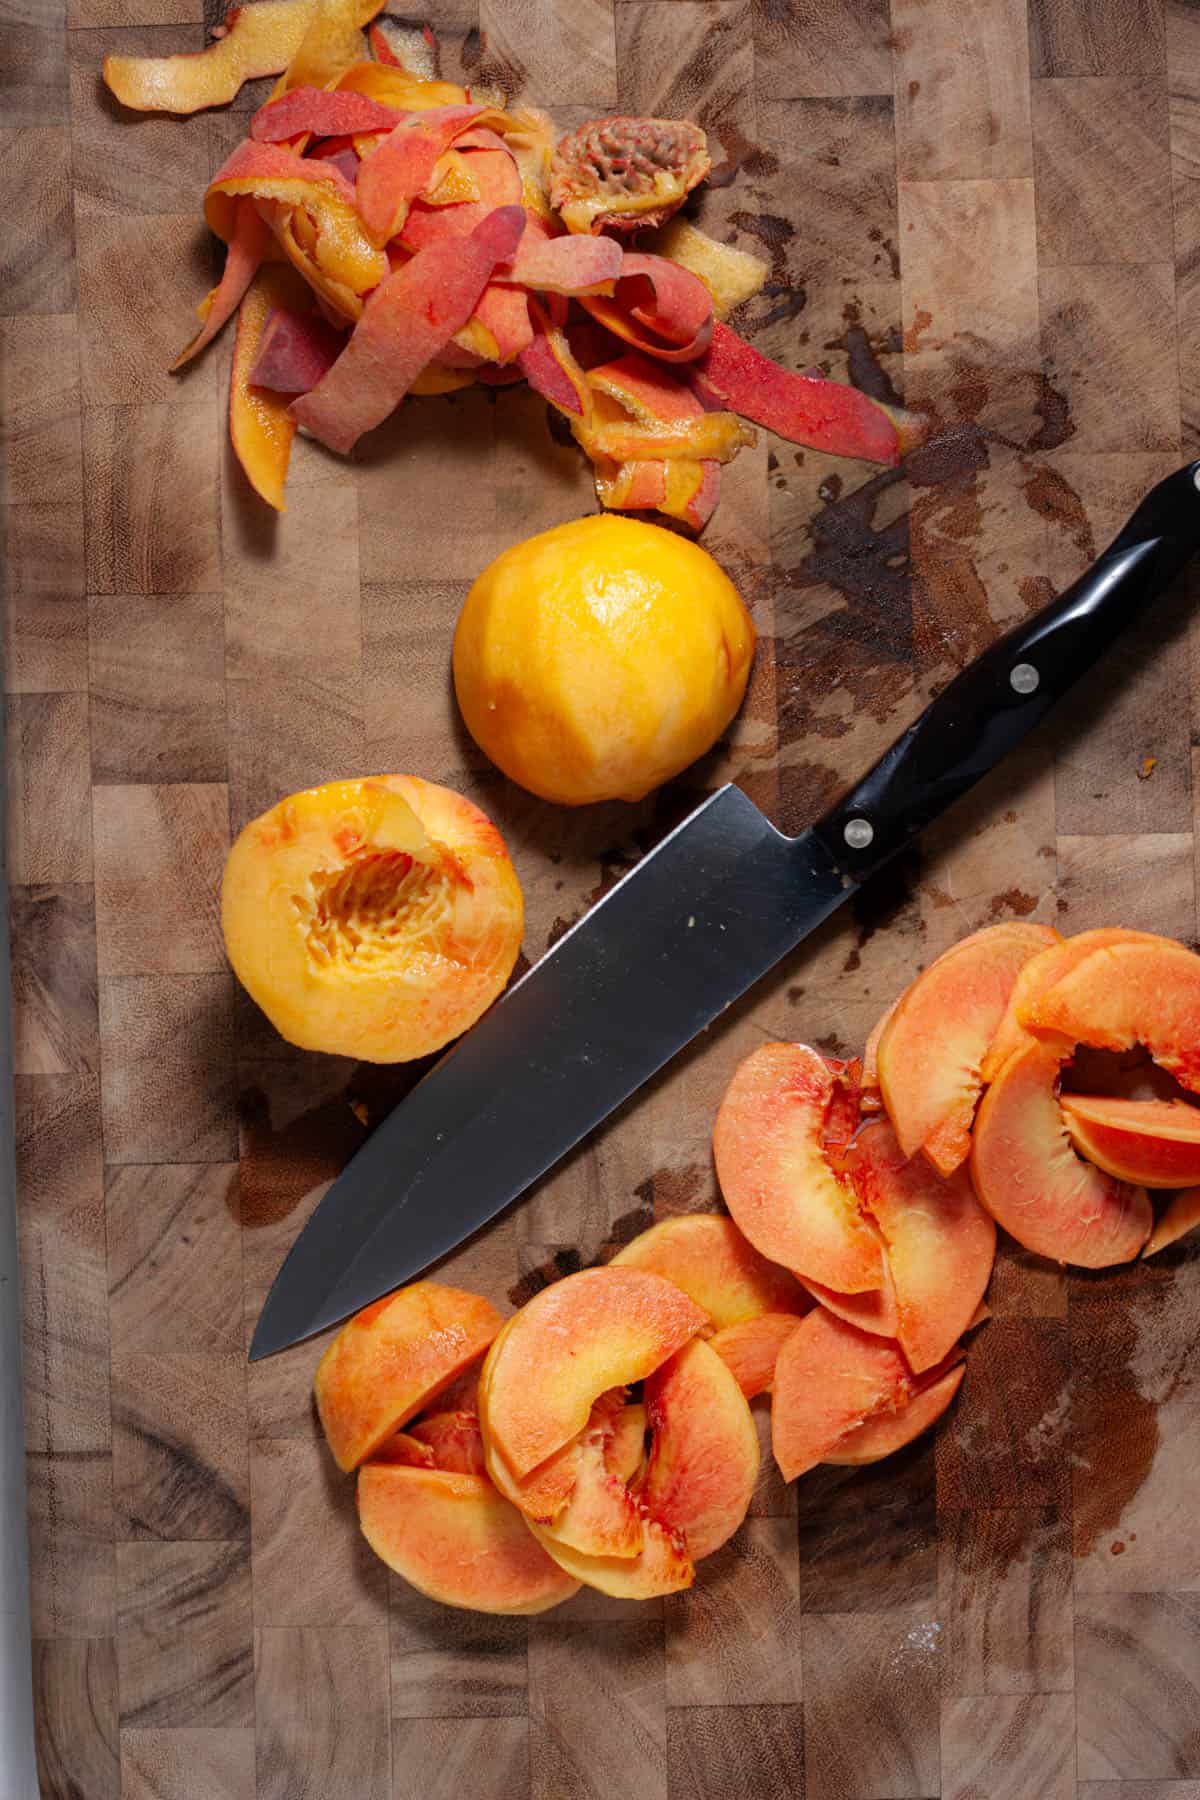 Peaches getting sliced on a wooden cutting board.